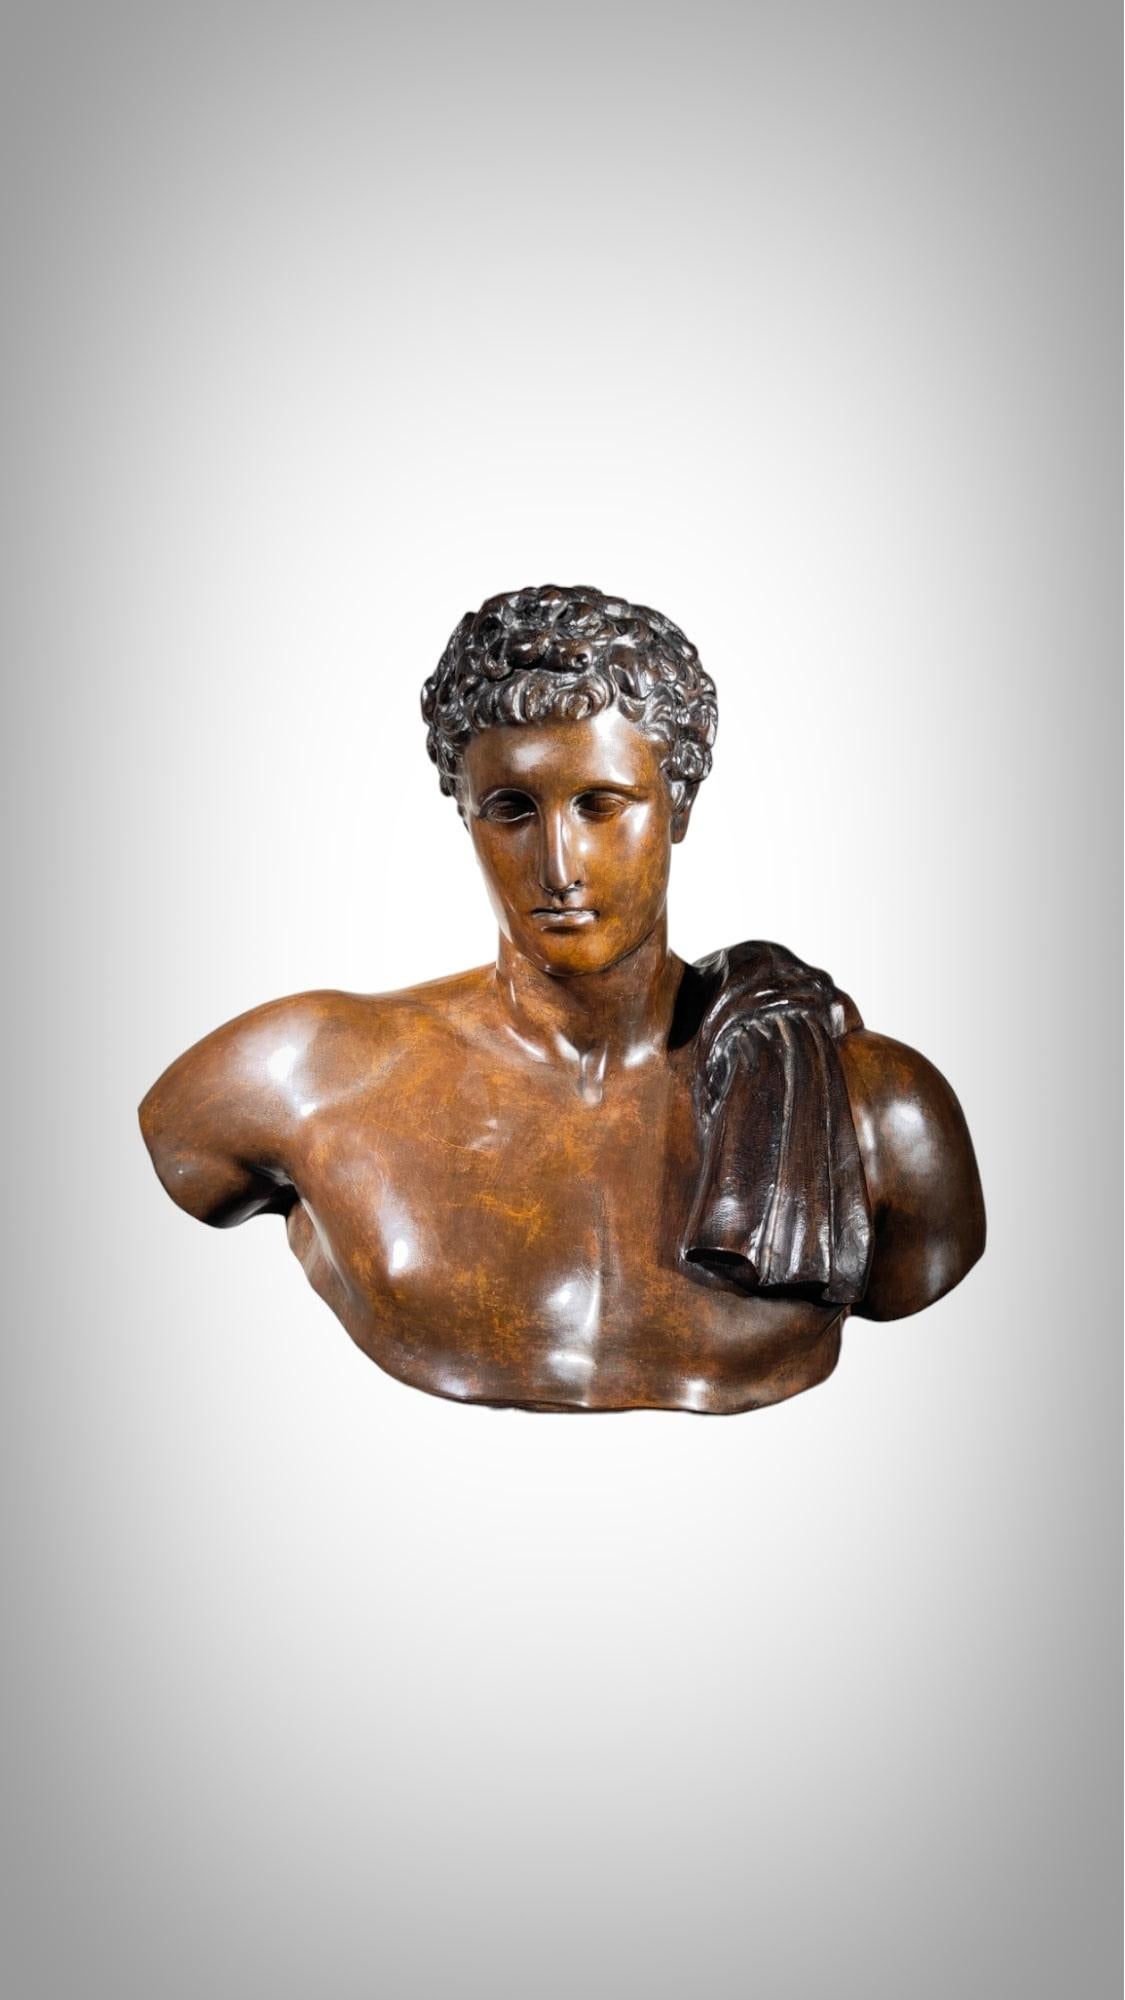 Life-size Greco-Roman bronze bust, 19th century
Life-size Greco-Roman bronze bust, 19th century Large bust of a young Greco-Roman style from the 19th century. Excellent condition. Measurements 70x67x40 cm